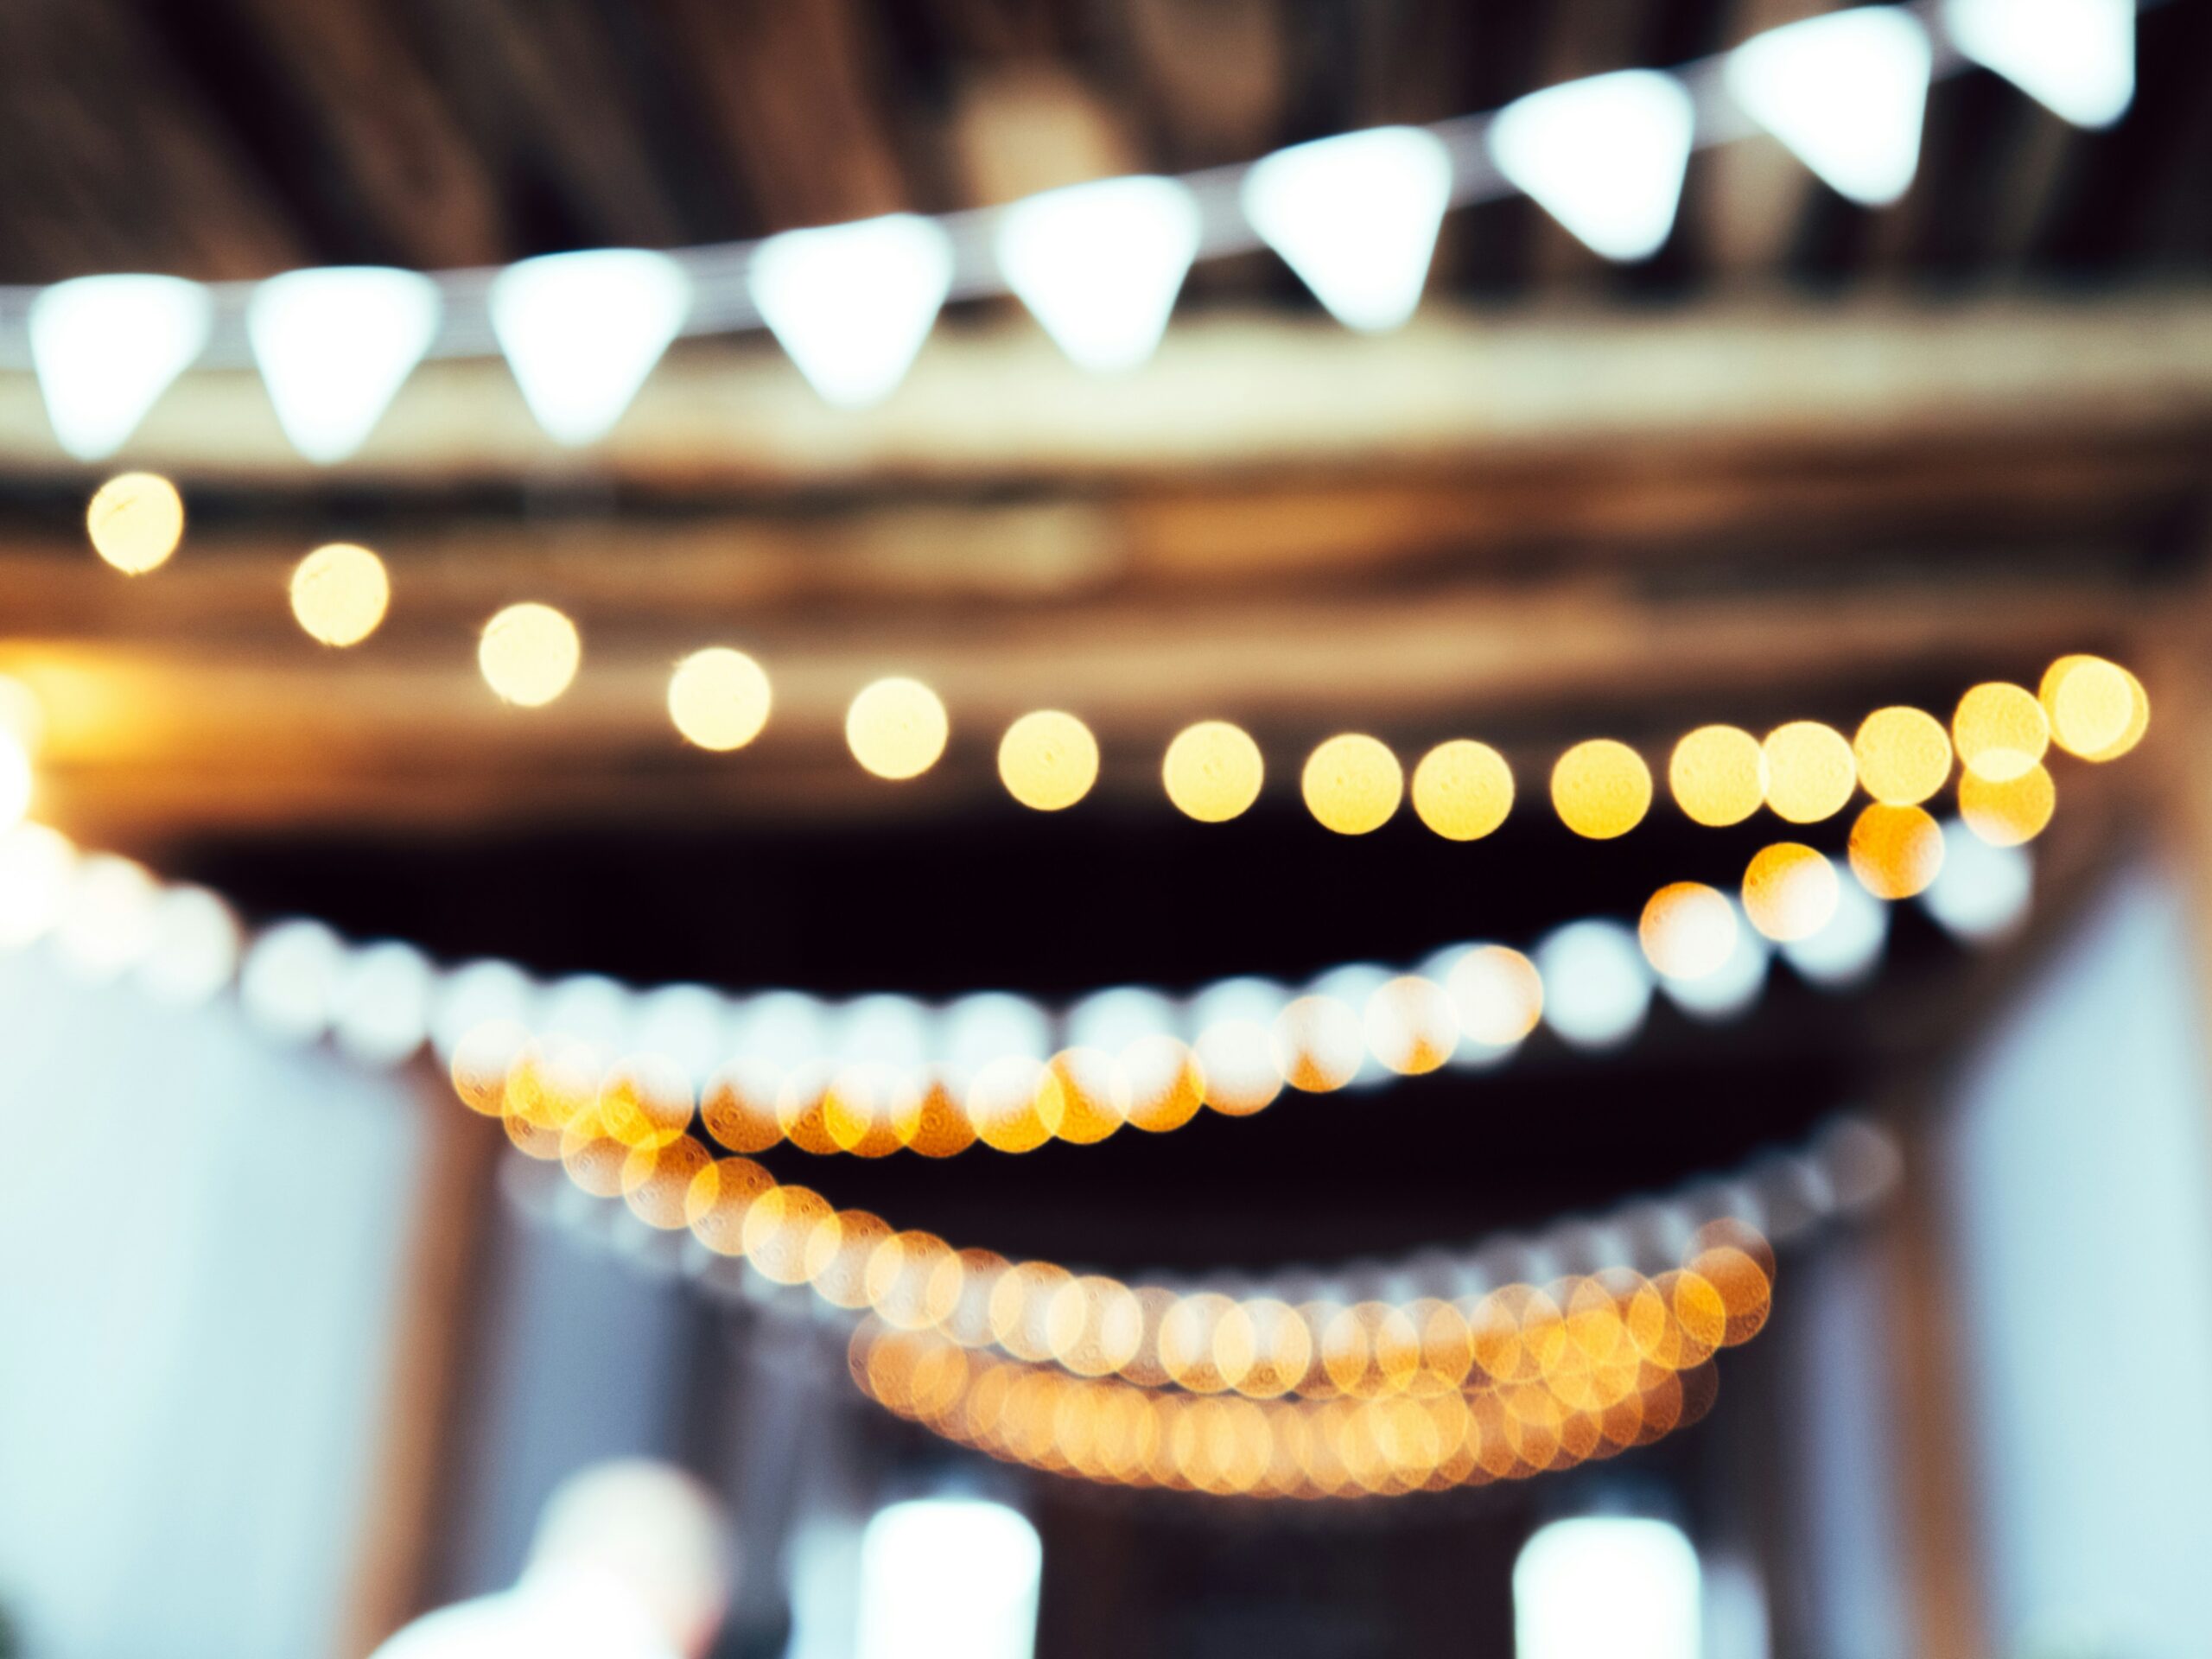 Check out everything that Airbnb users and hosts should know about events and parties. 
pictured: blurred party streamers and lights 